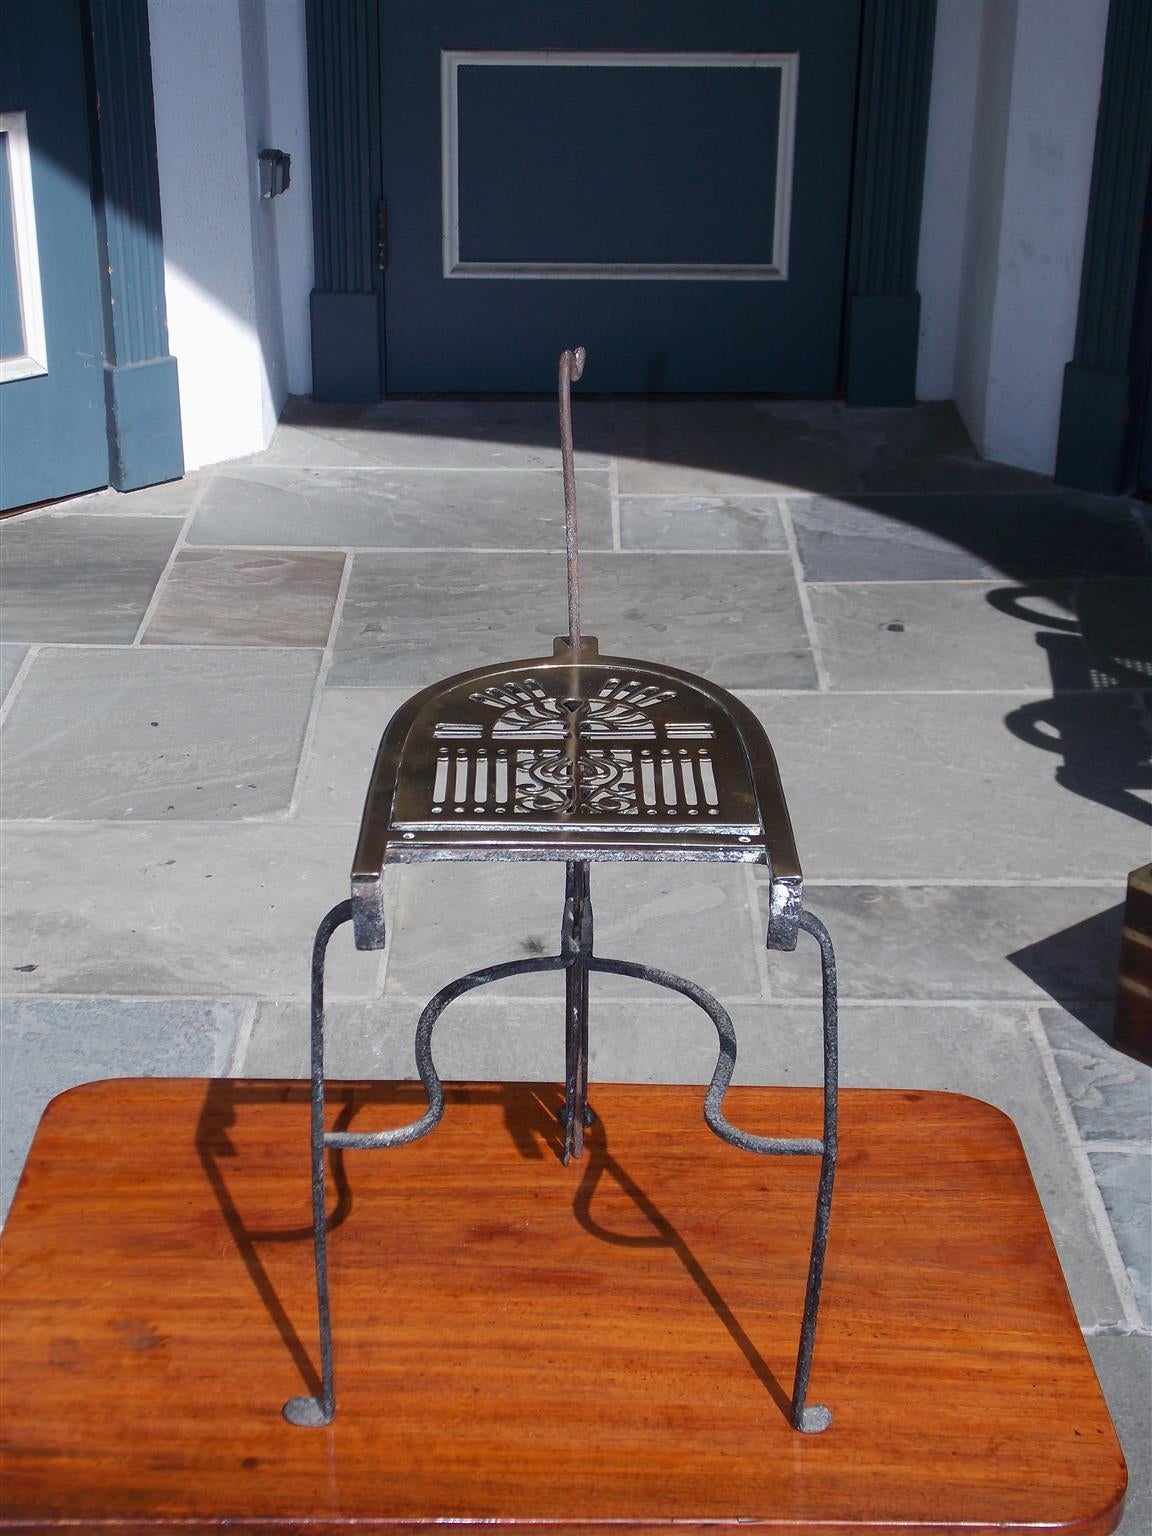 American Pierced Brass and Wrought Iron Ratcheting Trivet, Circa 1750 In Excellent Condition For Sale In Hollywood, SC